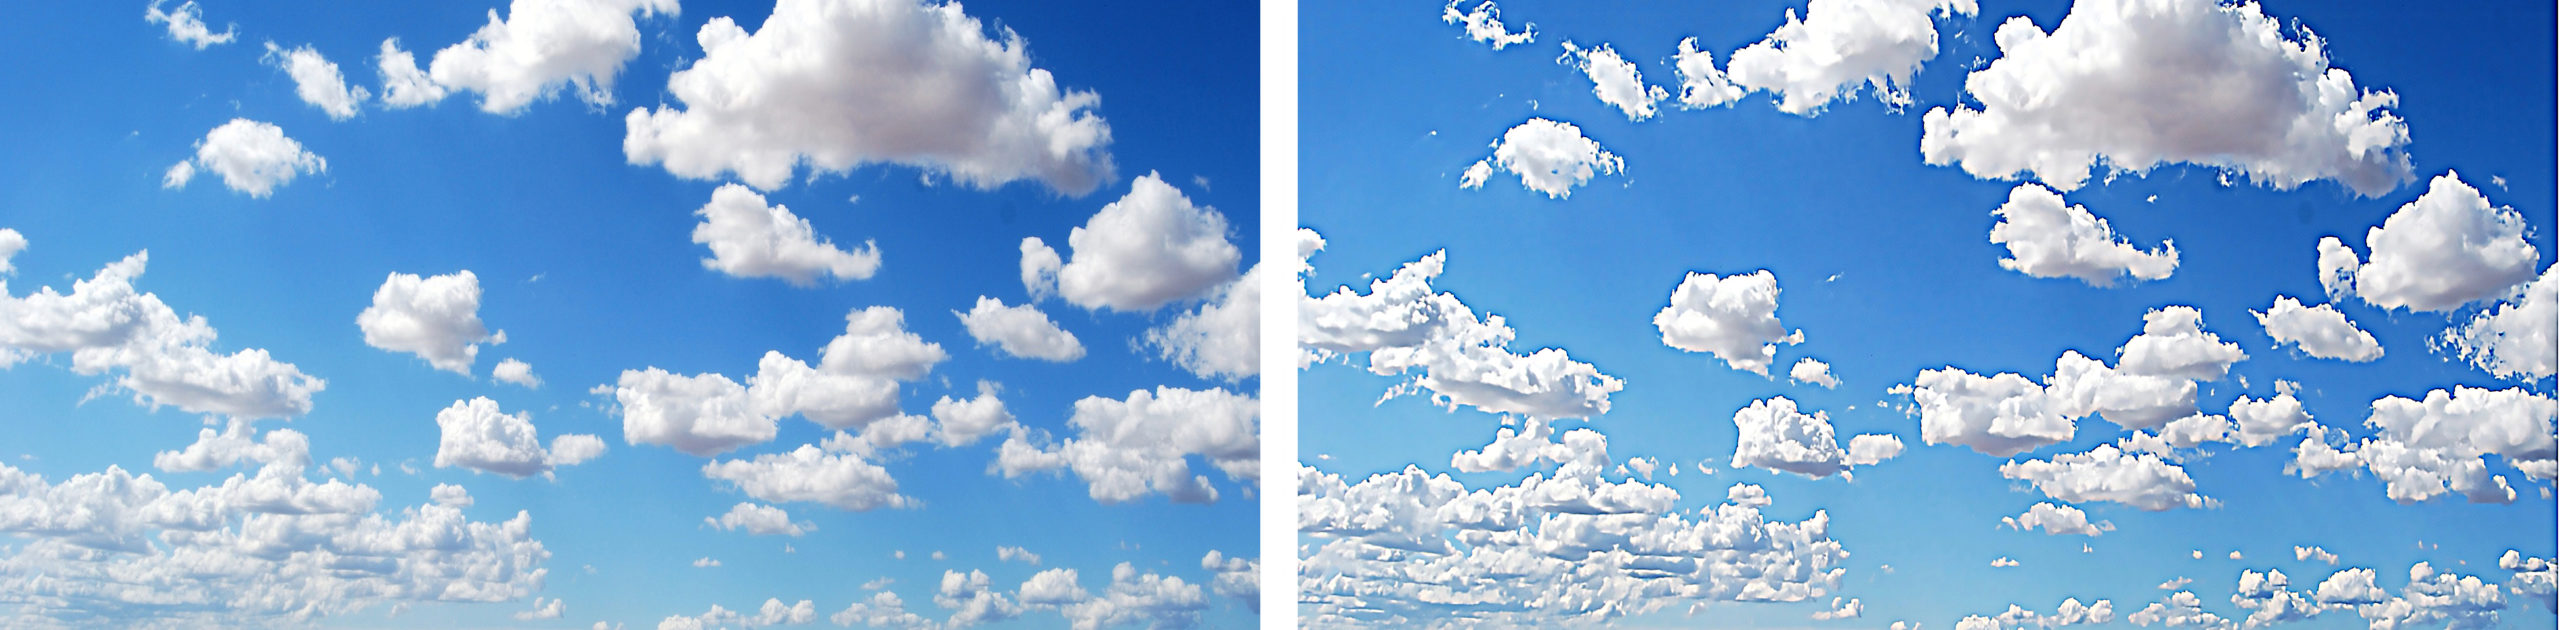 image of cumulative clouds, image on left without applied contrast, image on right with applied contrast 